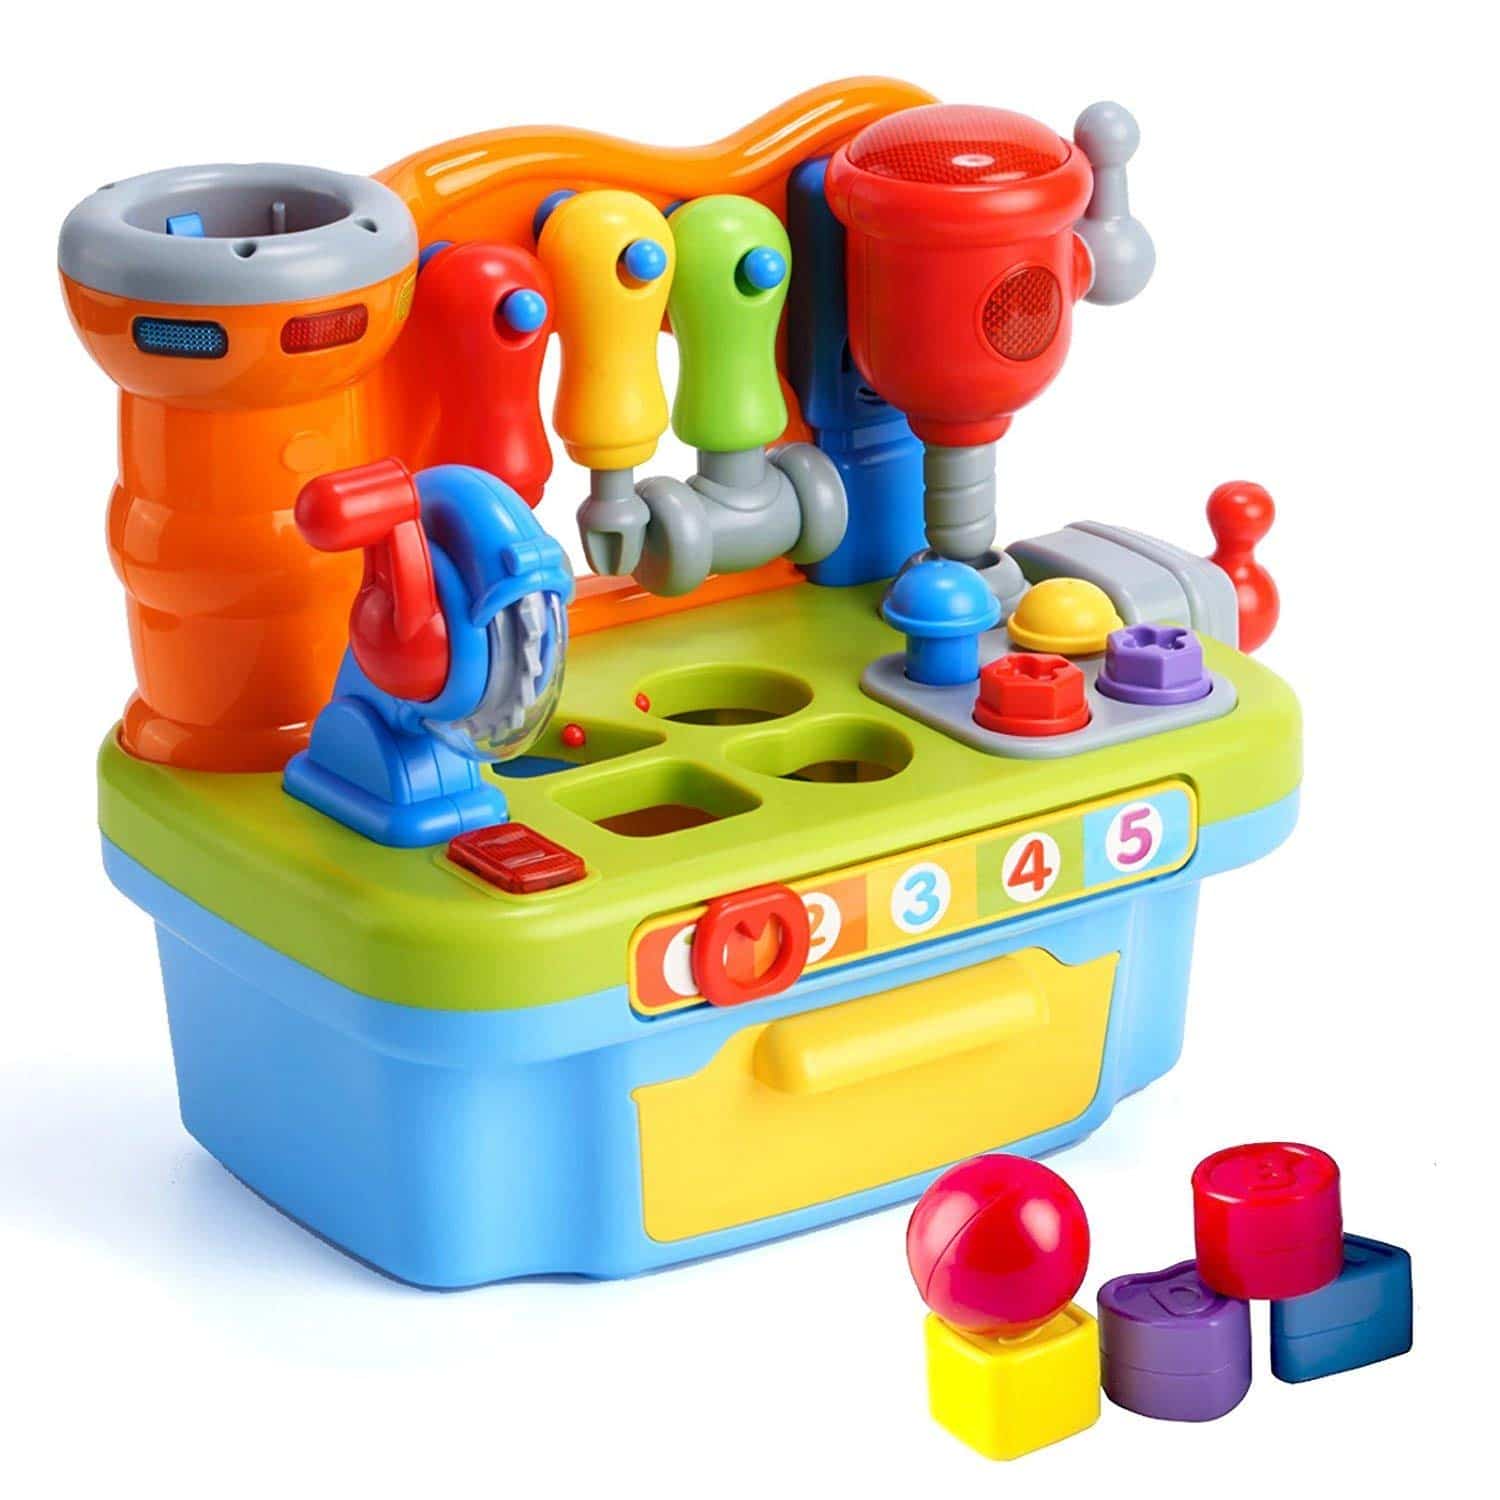 tool sets for toddlers